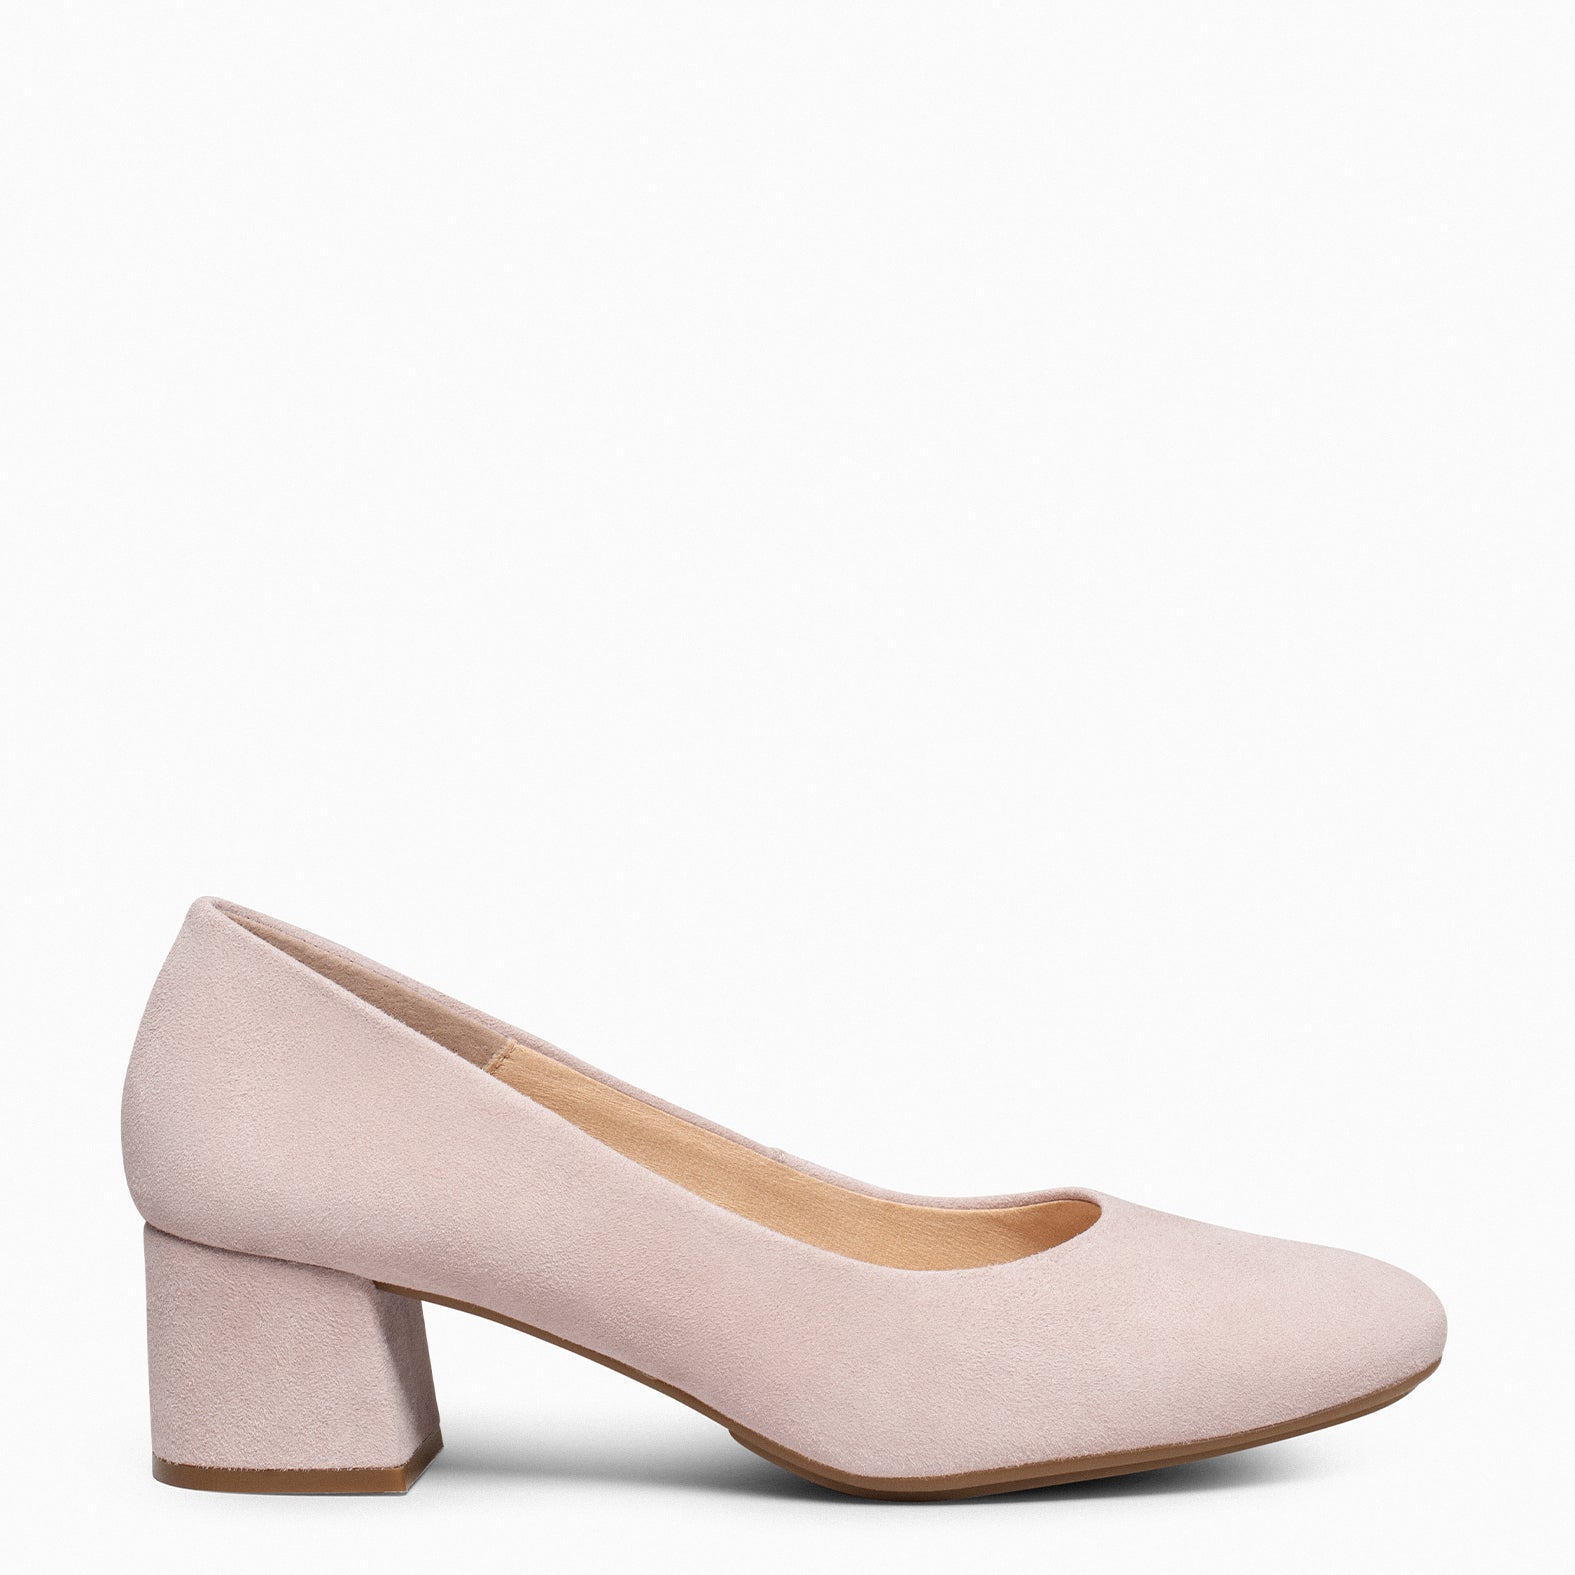 URBAN ROUND – NUDE suede leather low heels